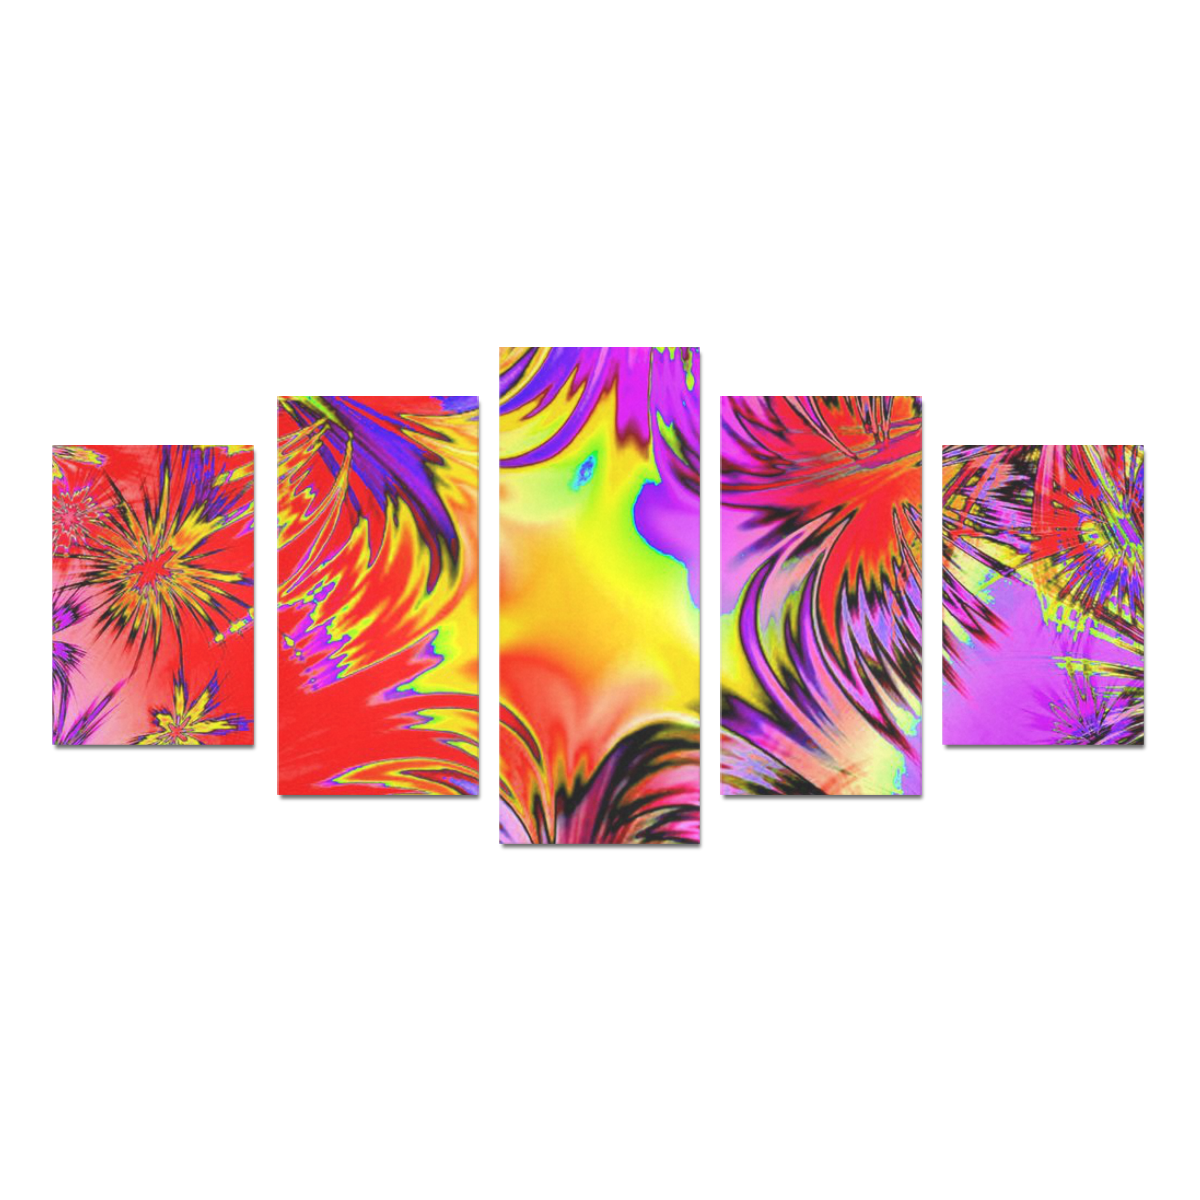 alive 4B (abstract) by JamColors Canvas Print Sets D (No Frame)